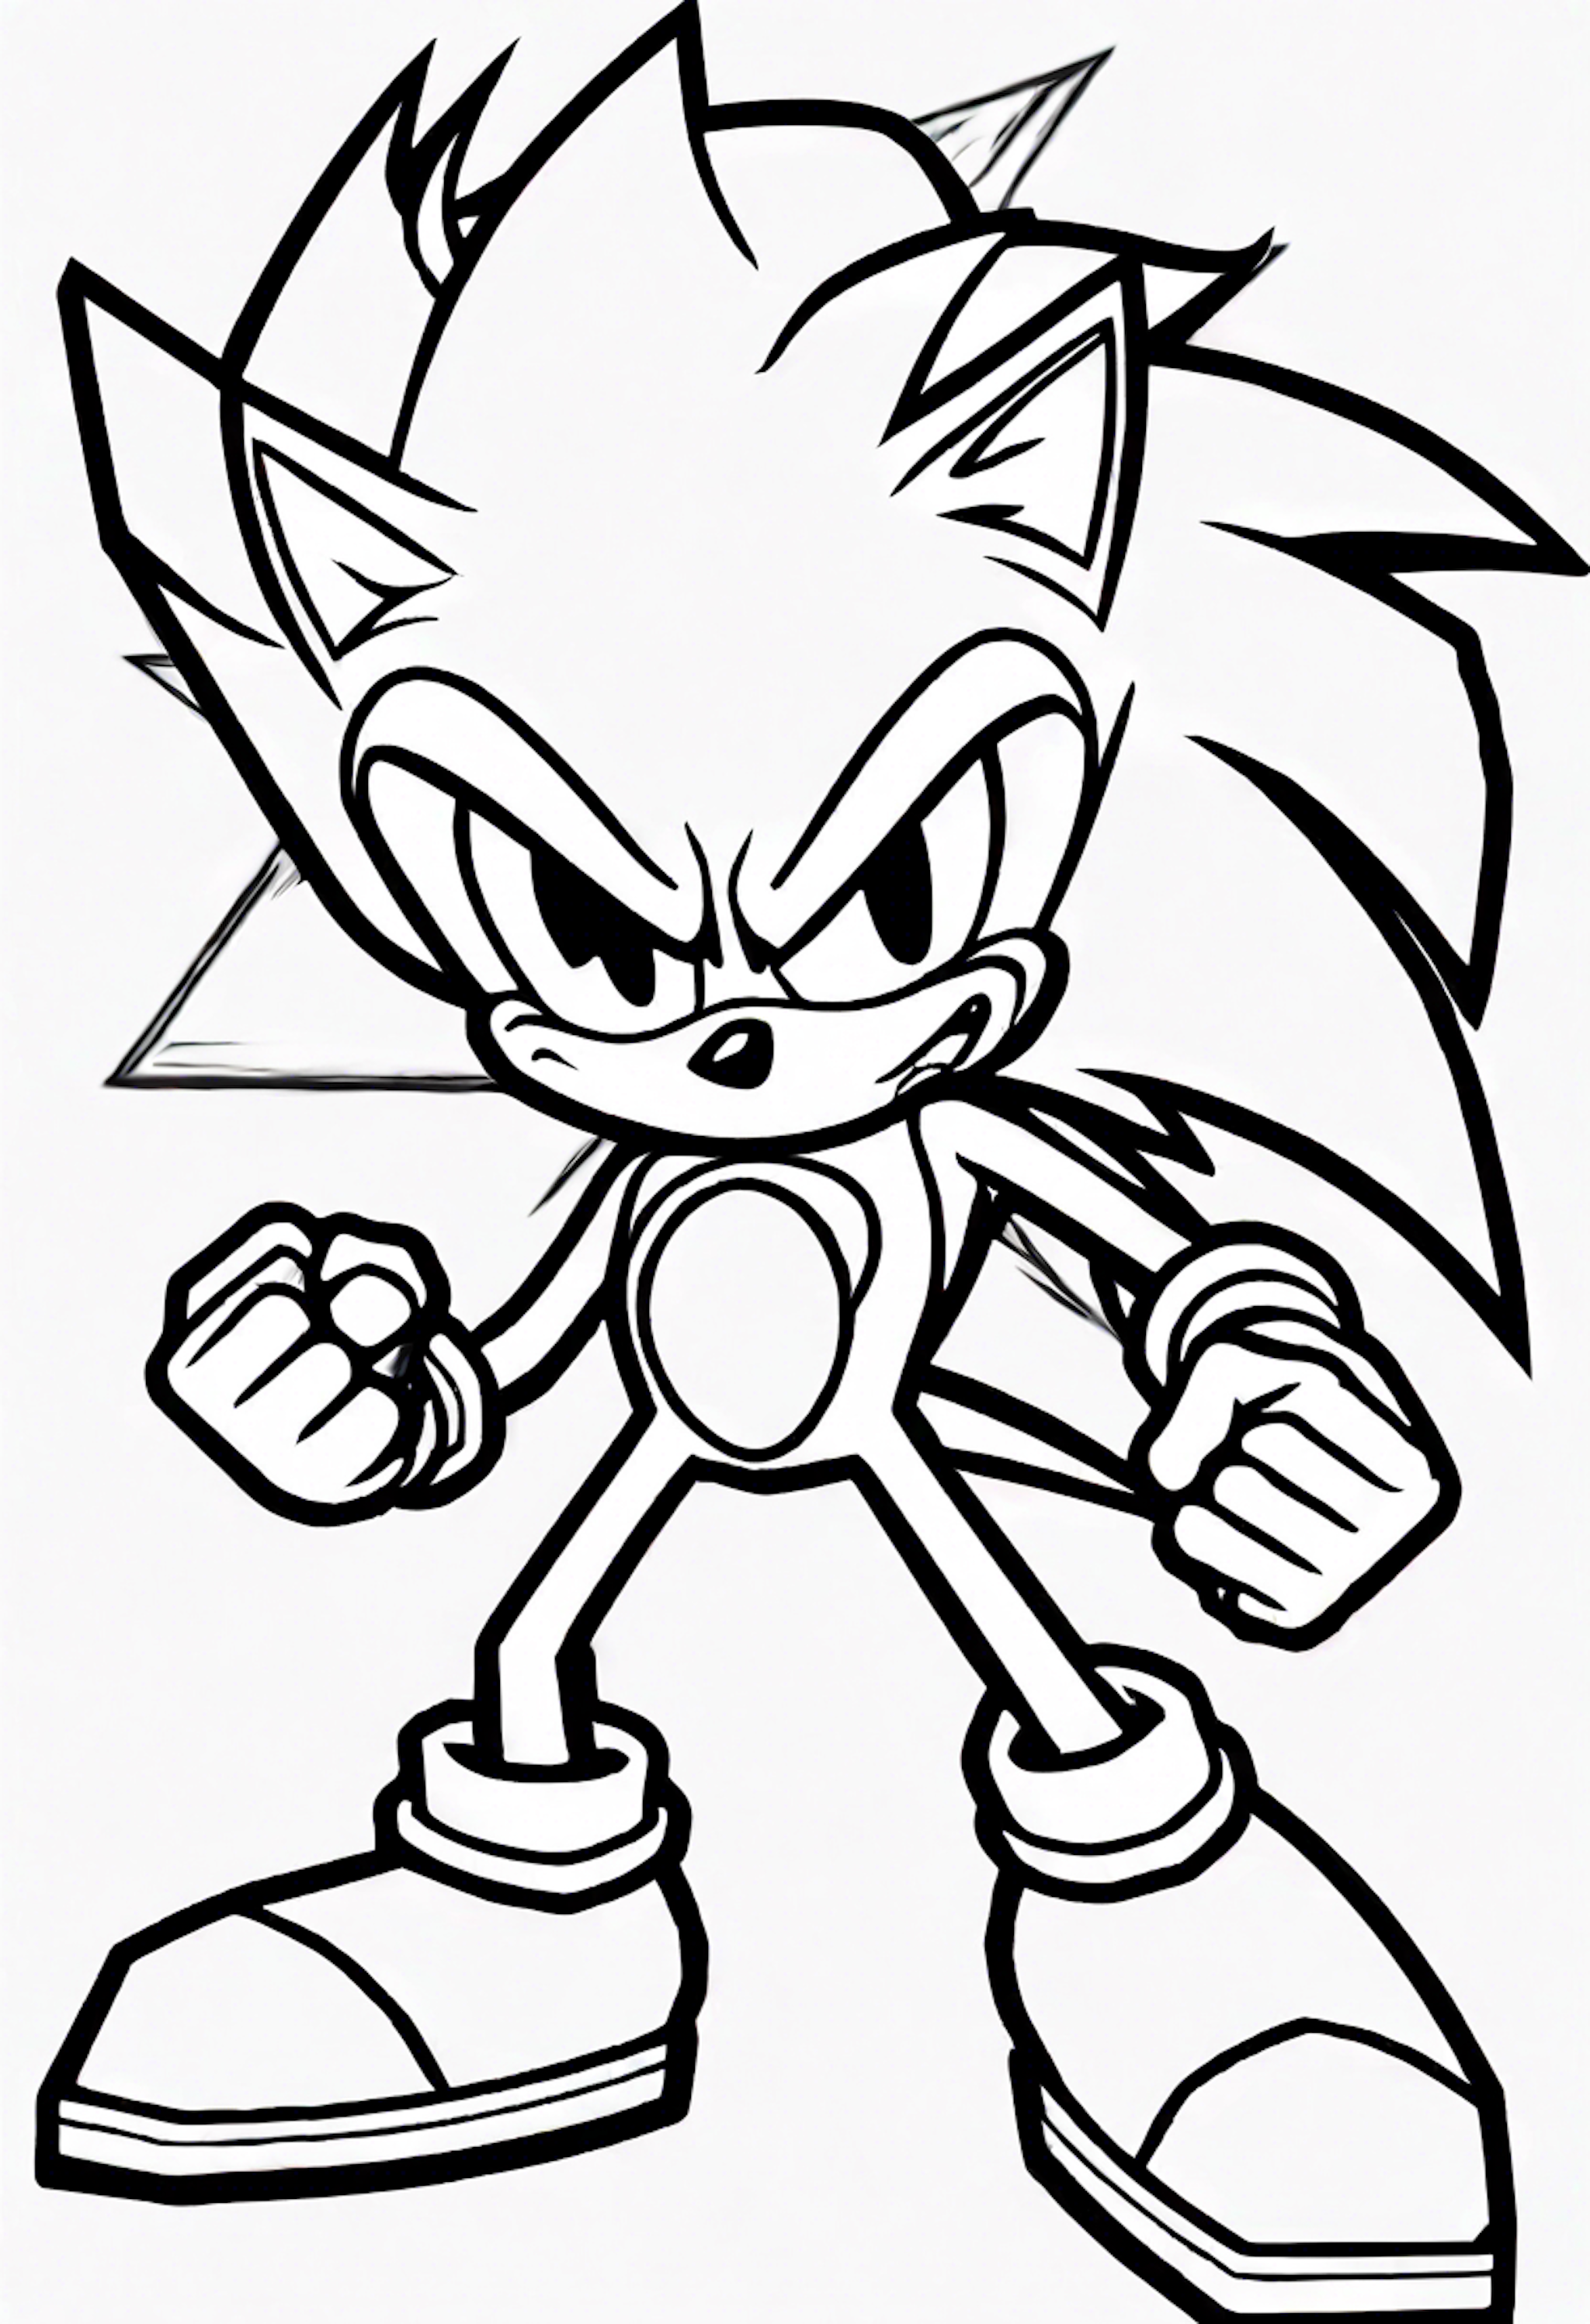 A coloring page for 1 Super Sonic coloring pages